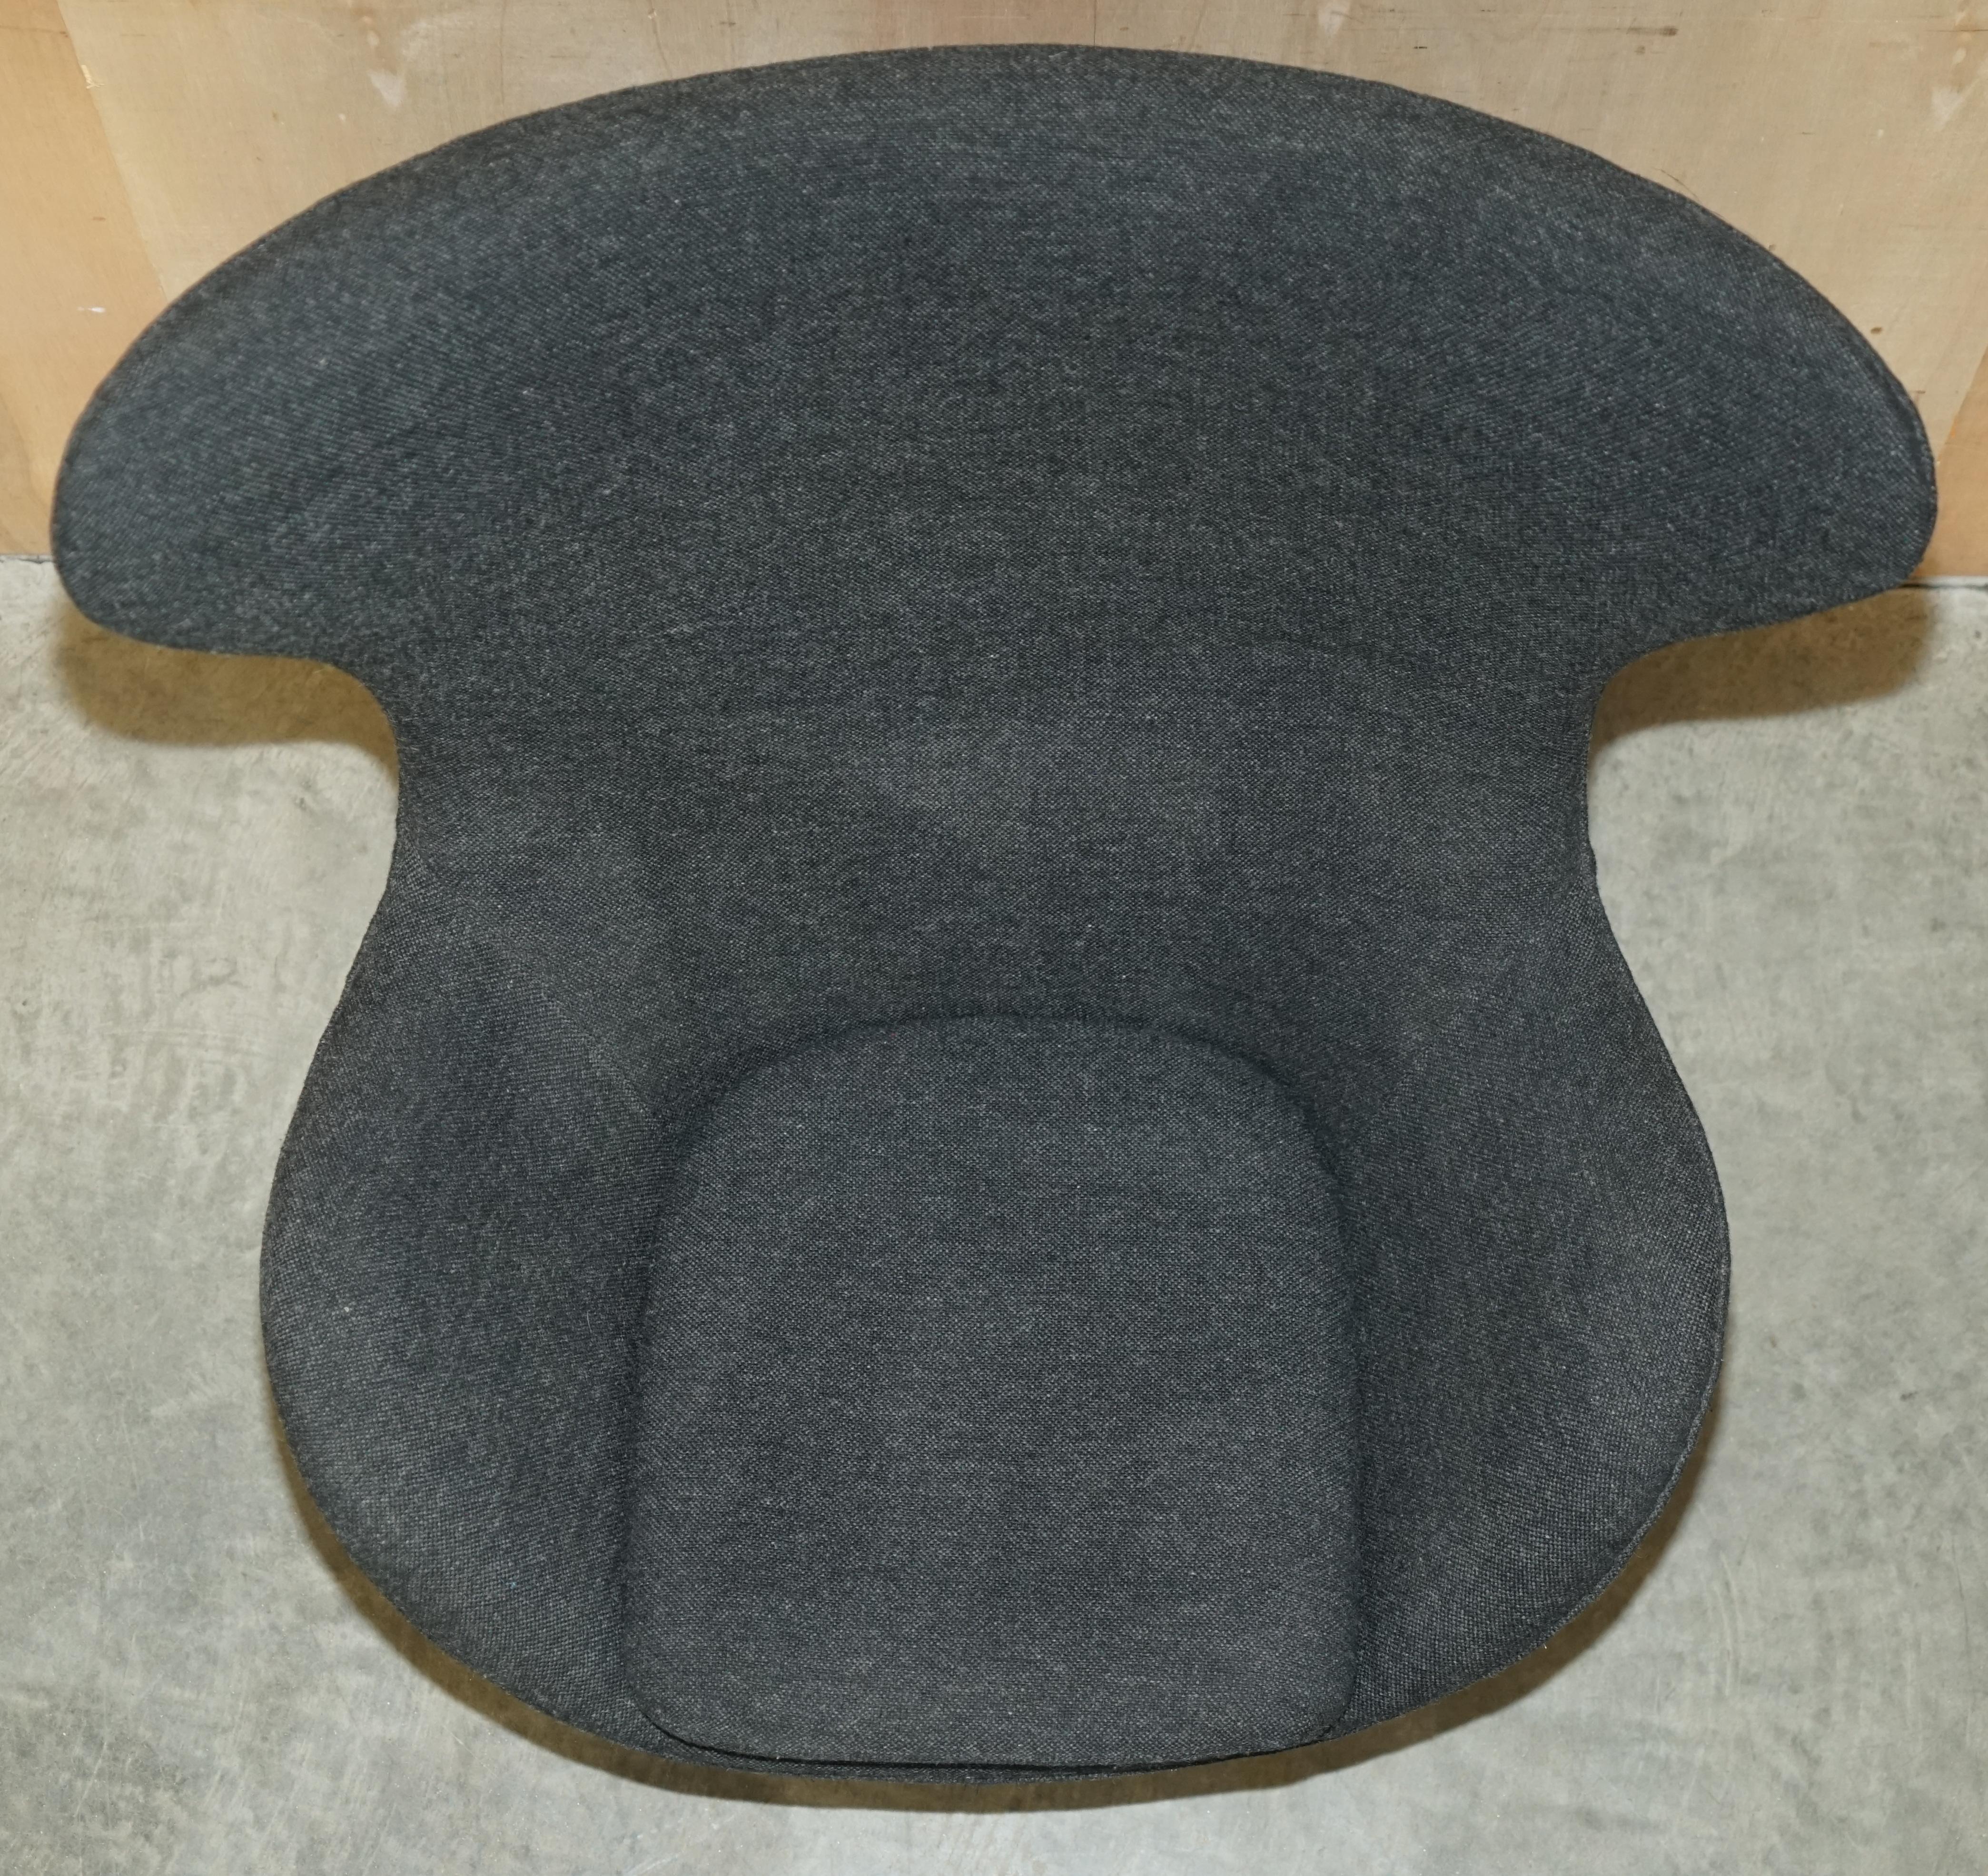 Original 1996 Stamped Fritz Hansen Egg Chair in Black / Grey Fabric For Sale 6